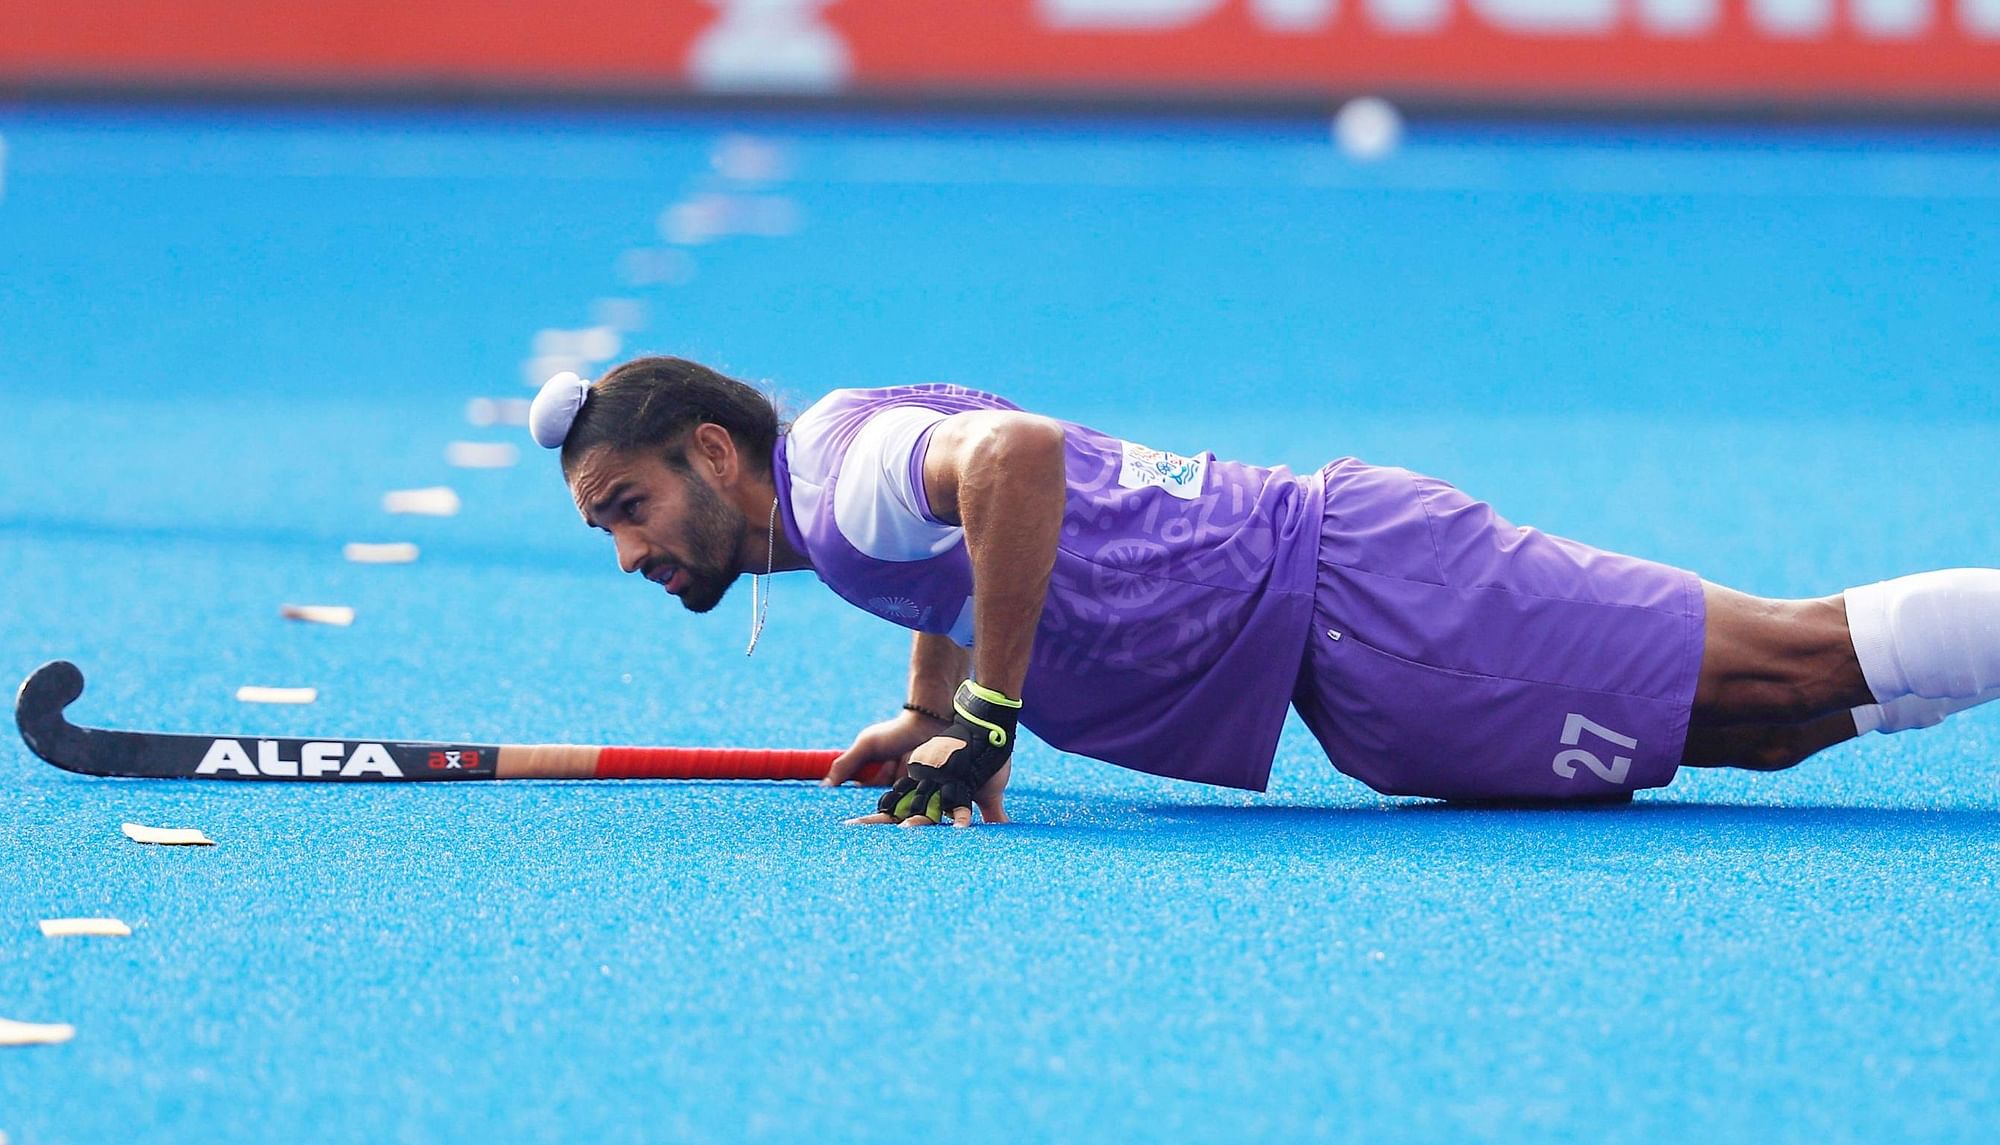 Mens Hockey World Cup 2018 Where to Watch the Matches Online and on TV